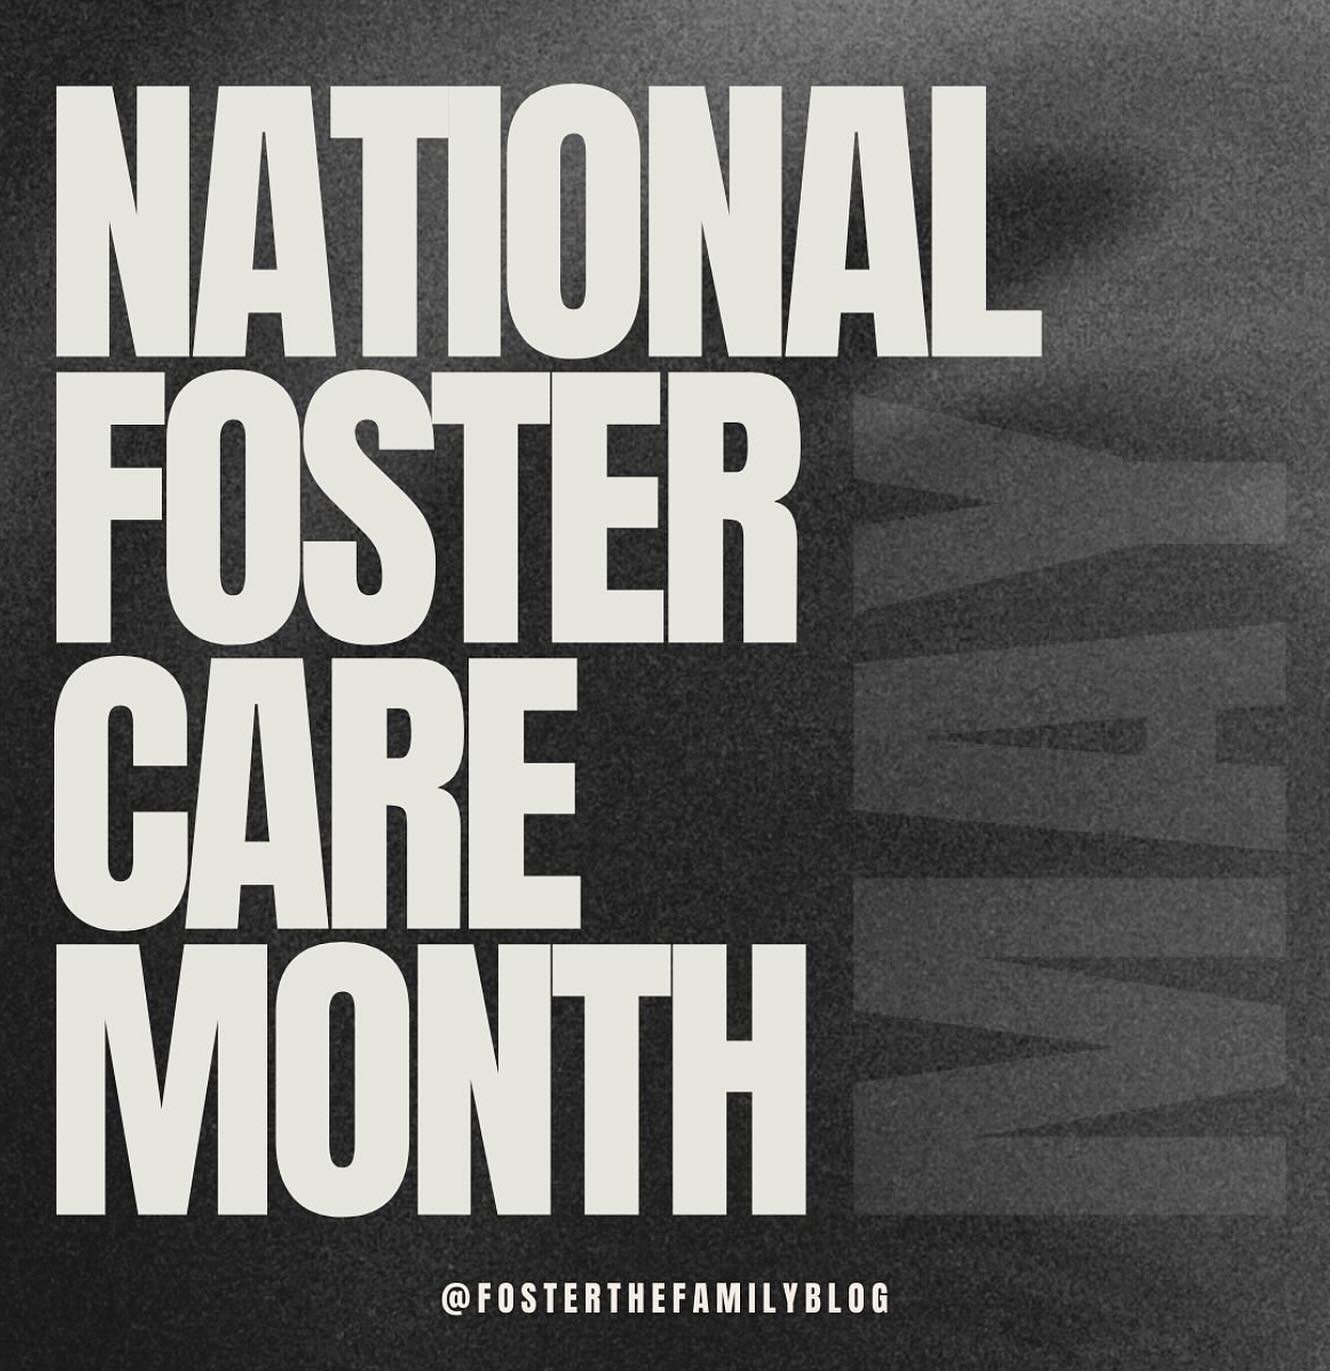 It&rsquo;s National Foster Care Month and we&rsquo;re excited to spend the month sharing more about the foster care system through @fosterthefamilyblog&rsquo;s prompts! 

A few things about our team:

▪️Every one in our team was in foster care but we